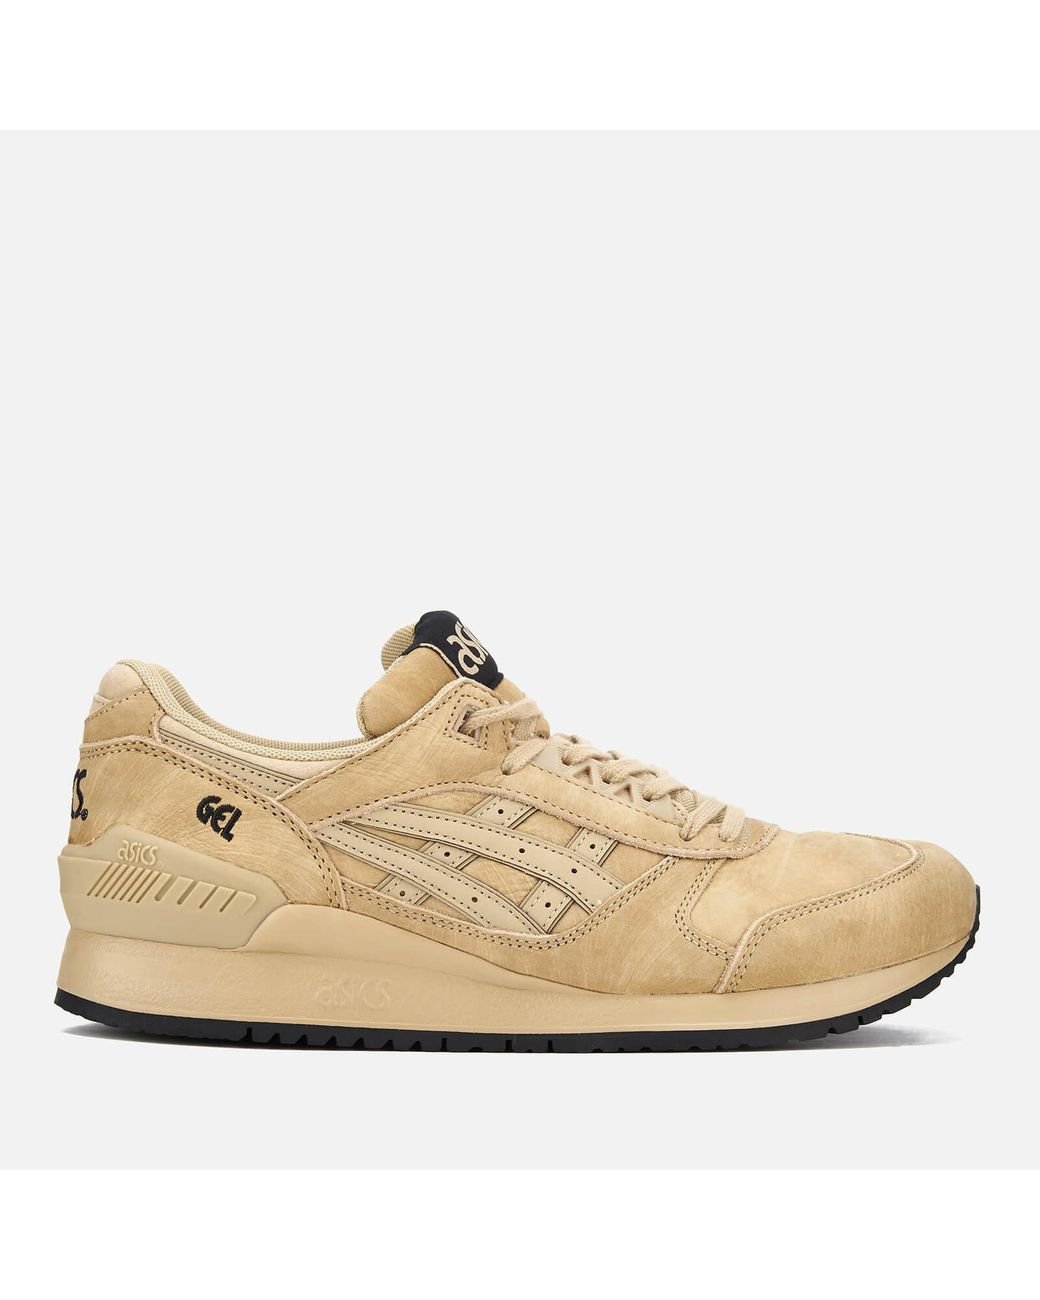 Asics Gel-respector Washed Suede Trainers | Lyst UK